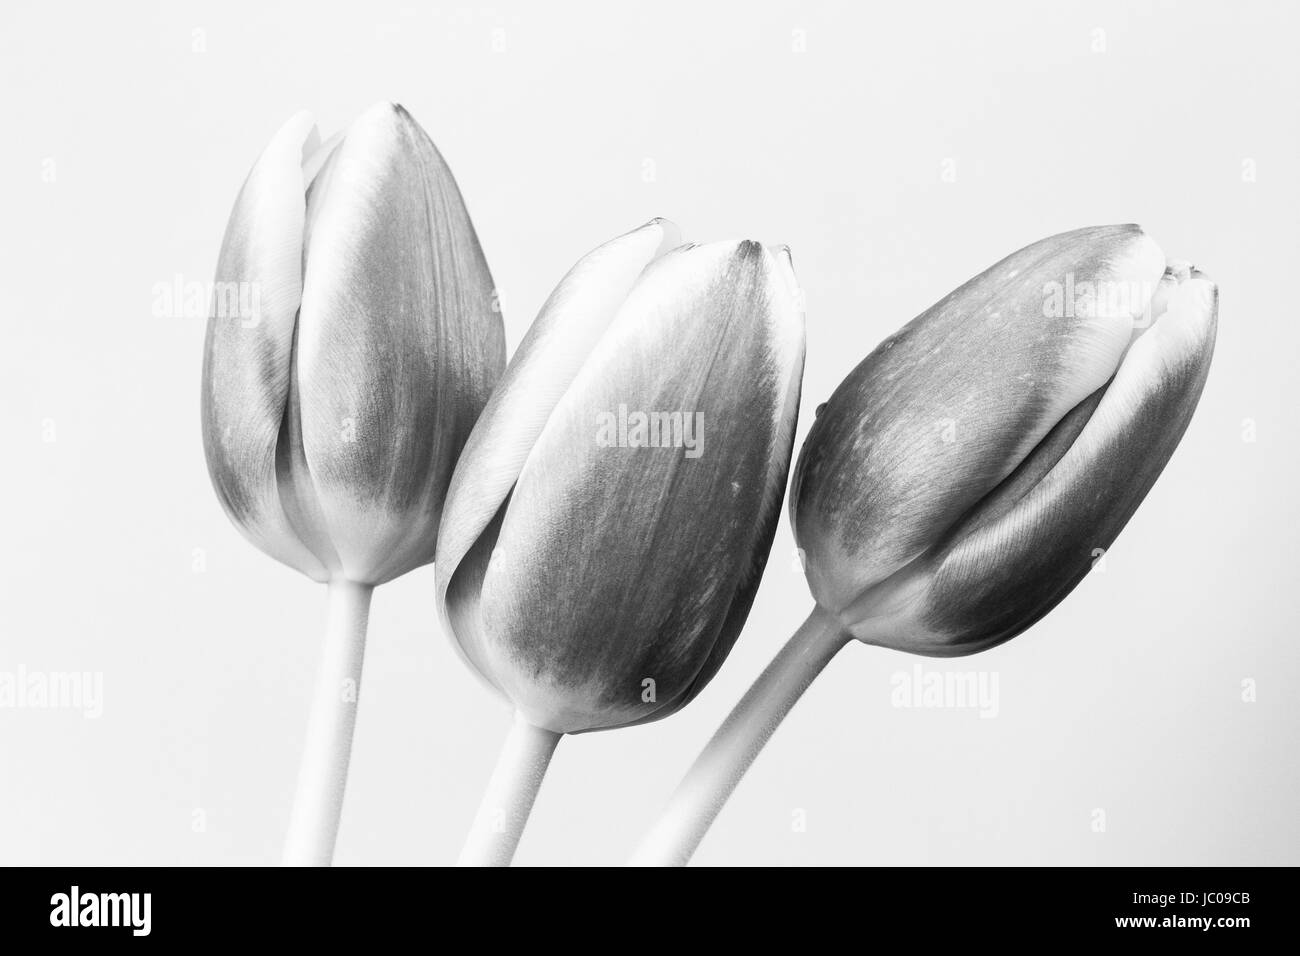 Flower Clipart Black And White Images – Browse 38,438 Stock Photos